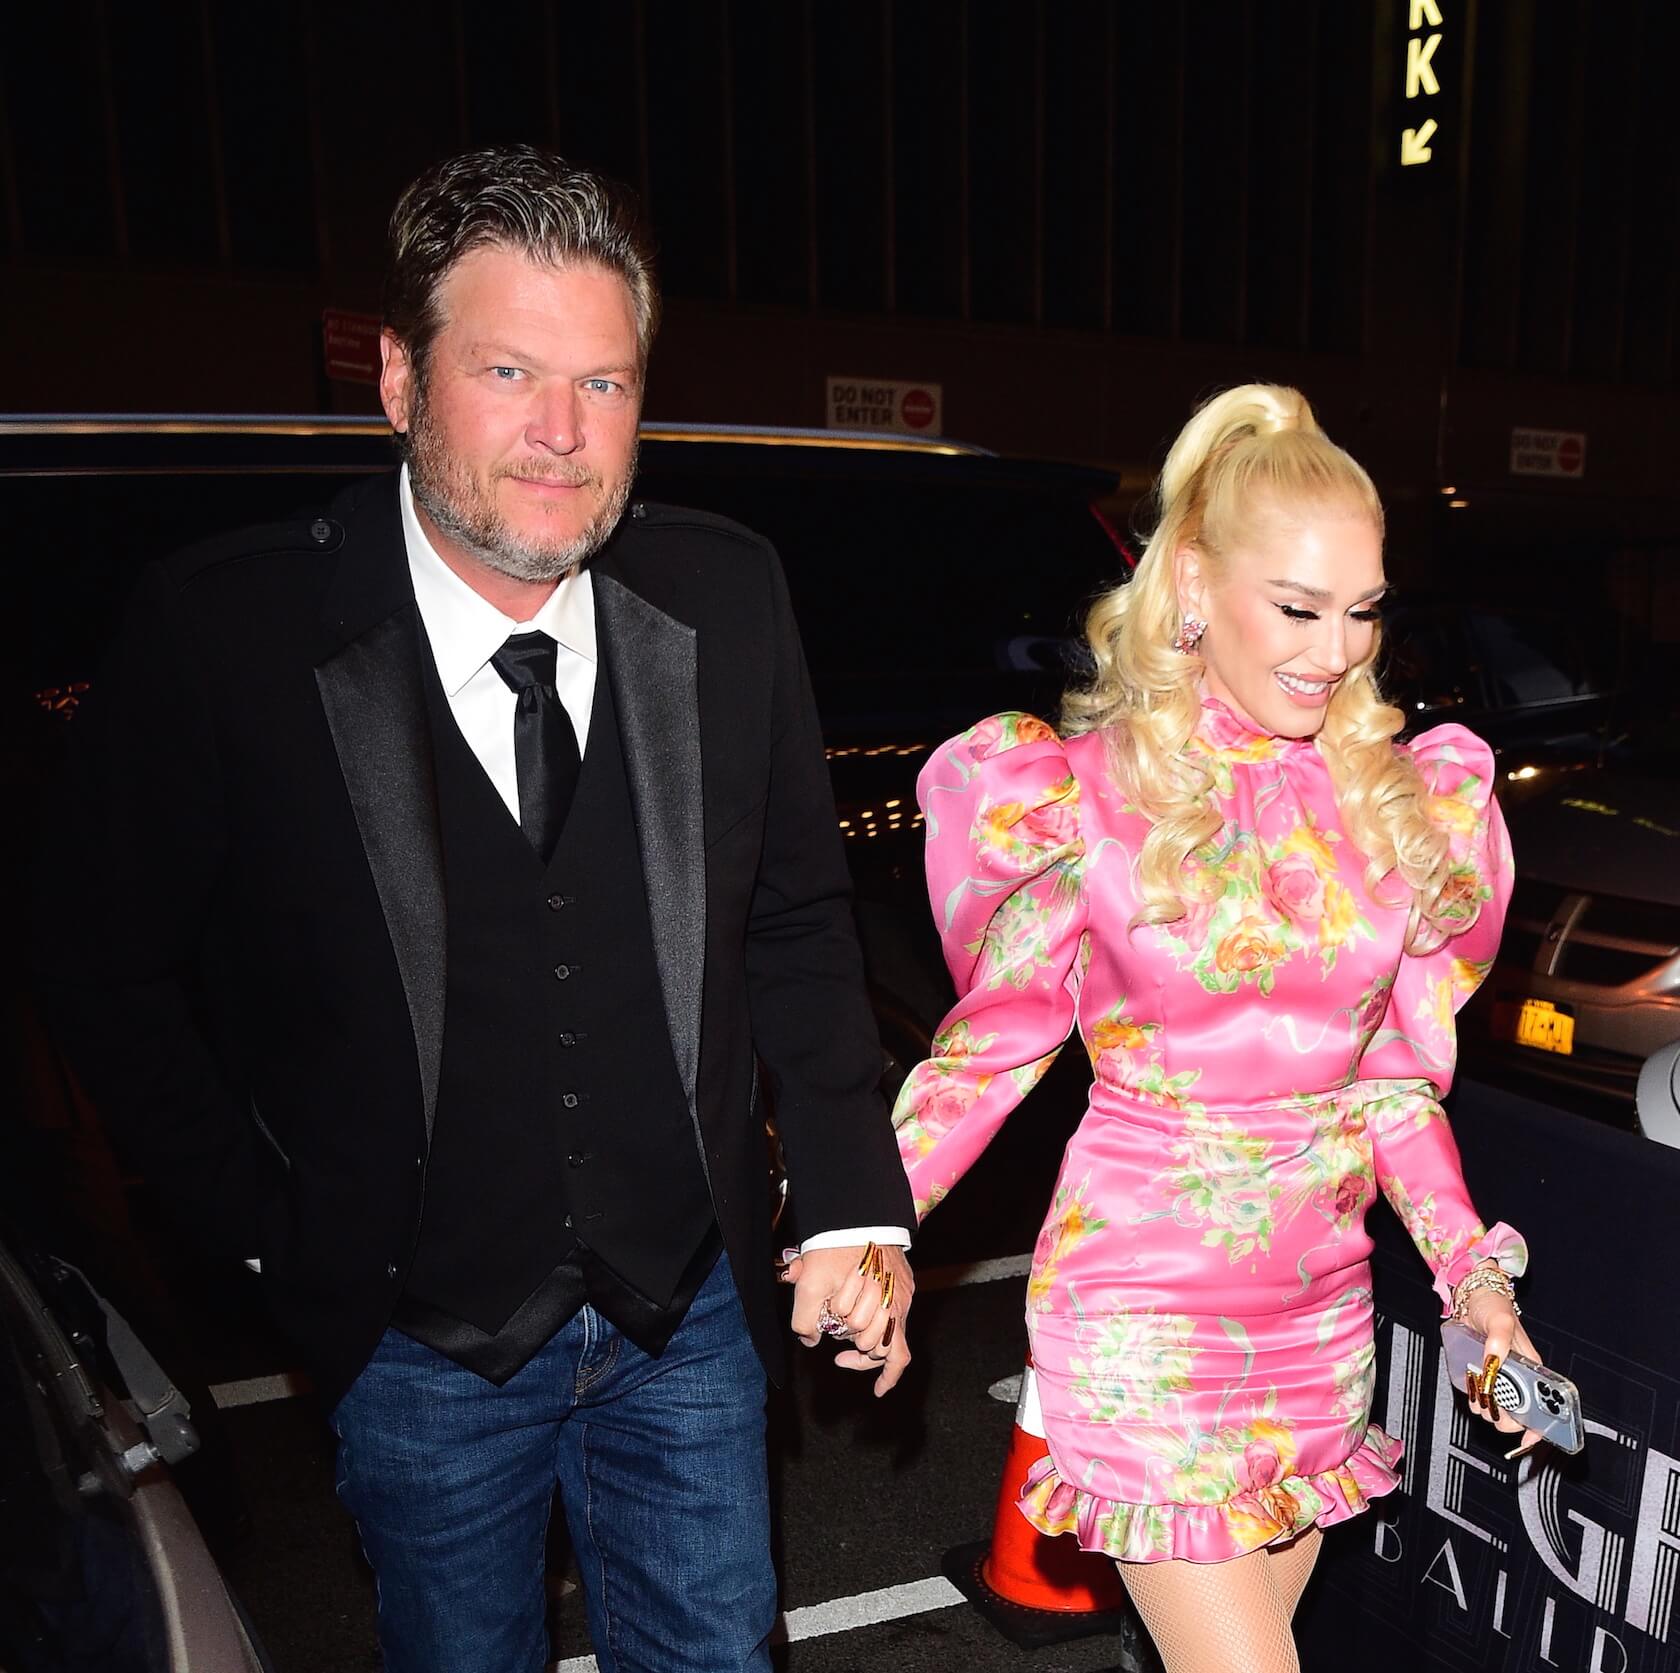 Blake Shelton in a suit holding hands and walking with 'The Voice' Season 24 coach Gwen Stefani in a pink dress